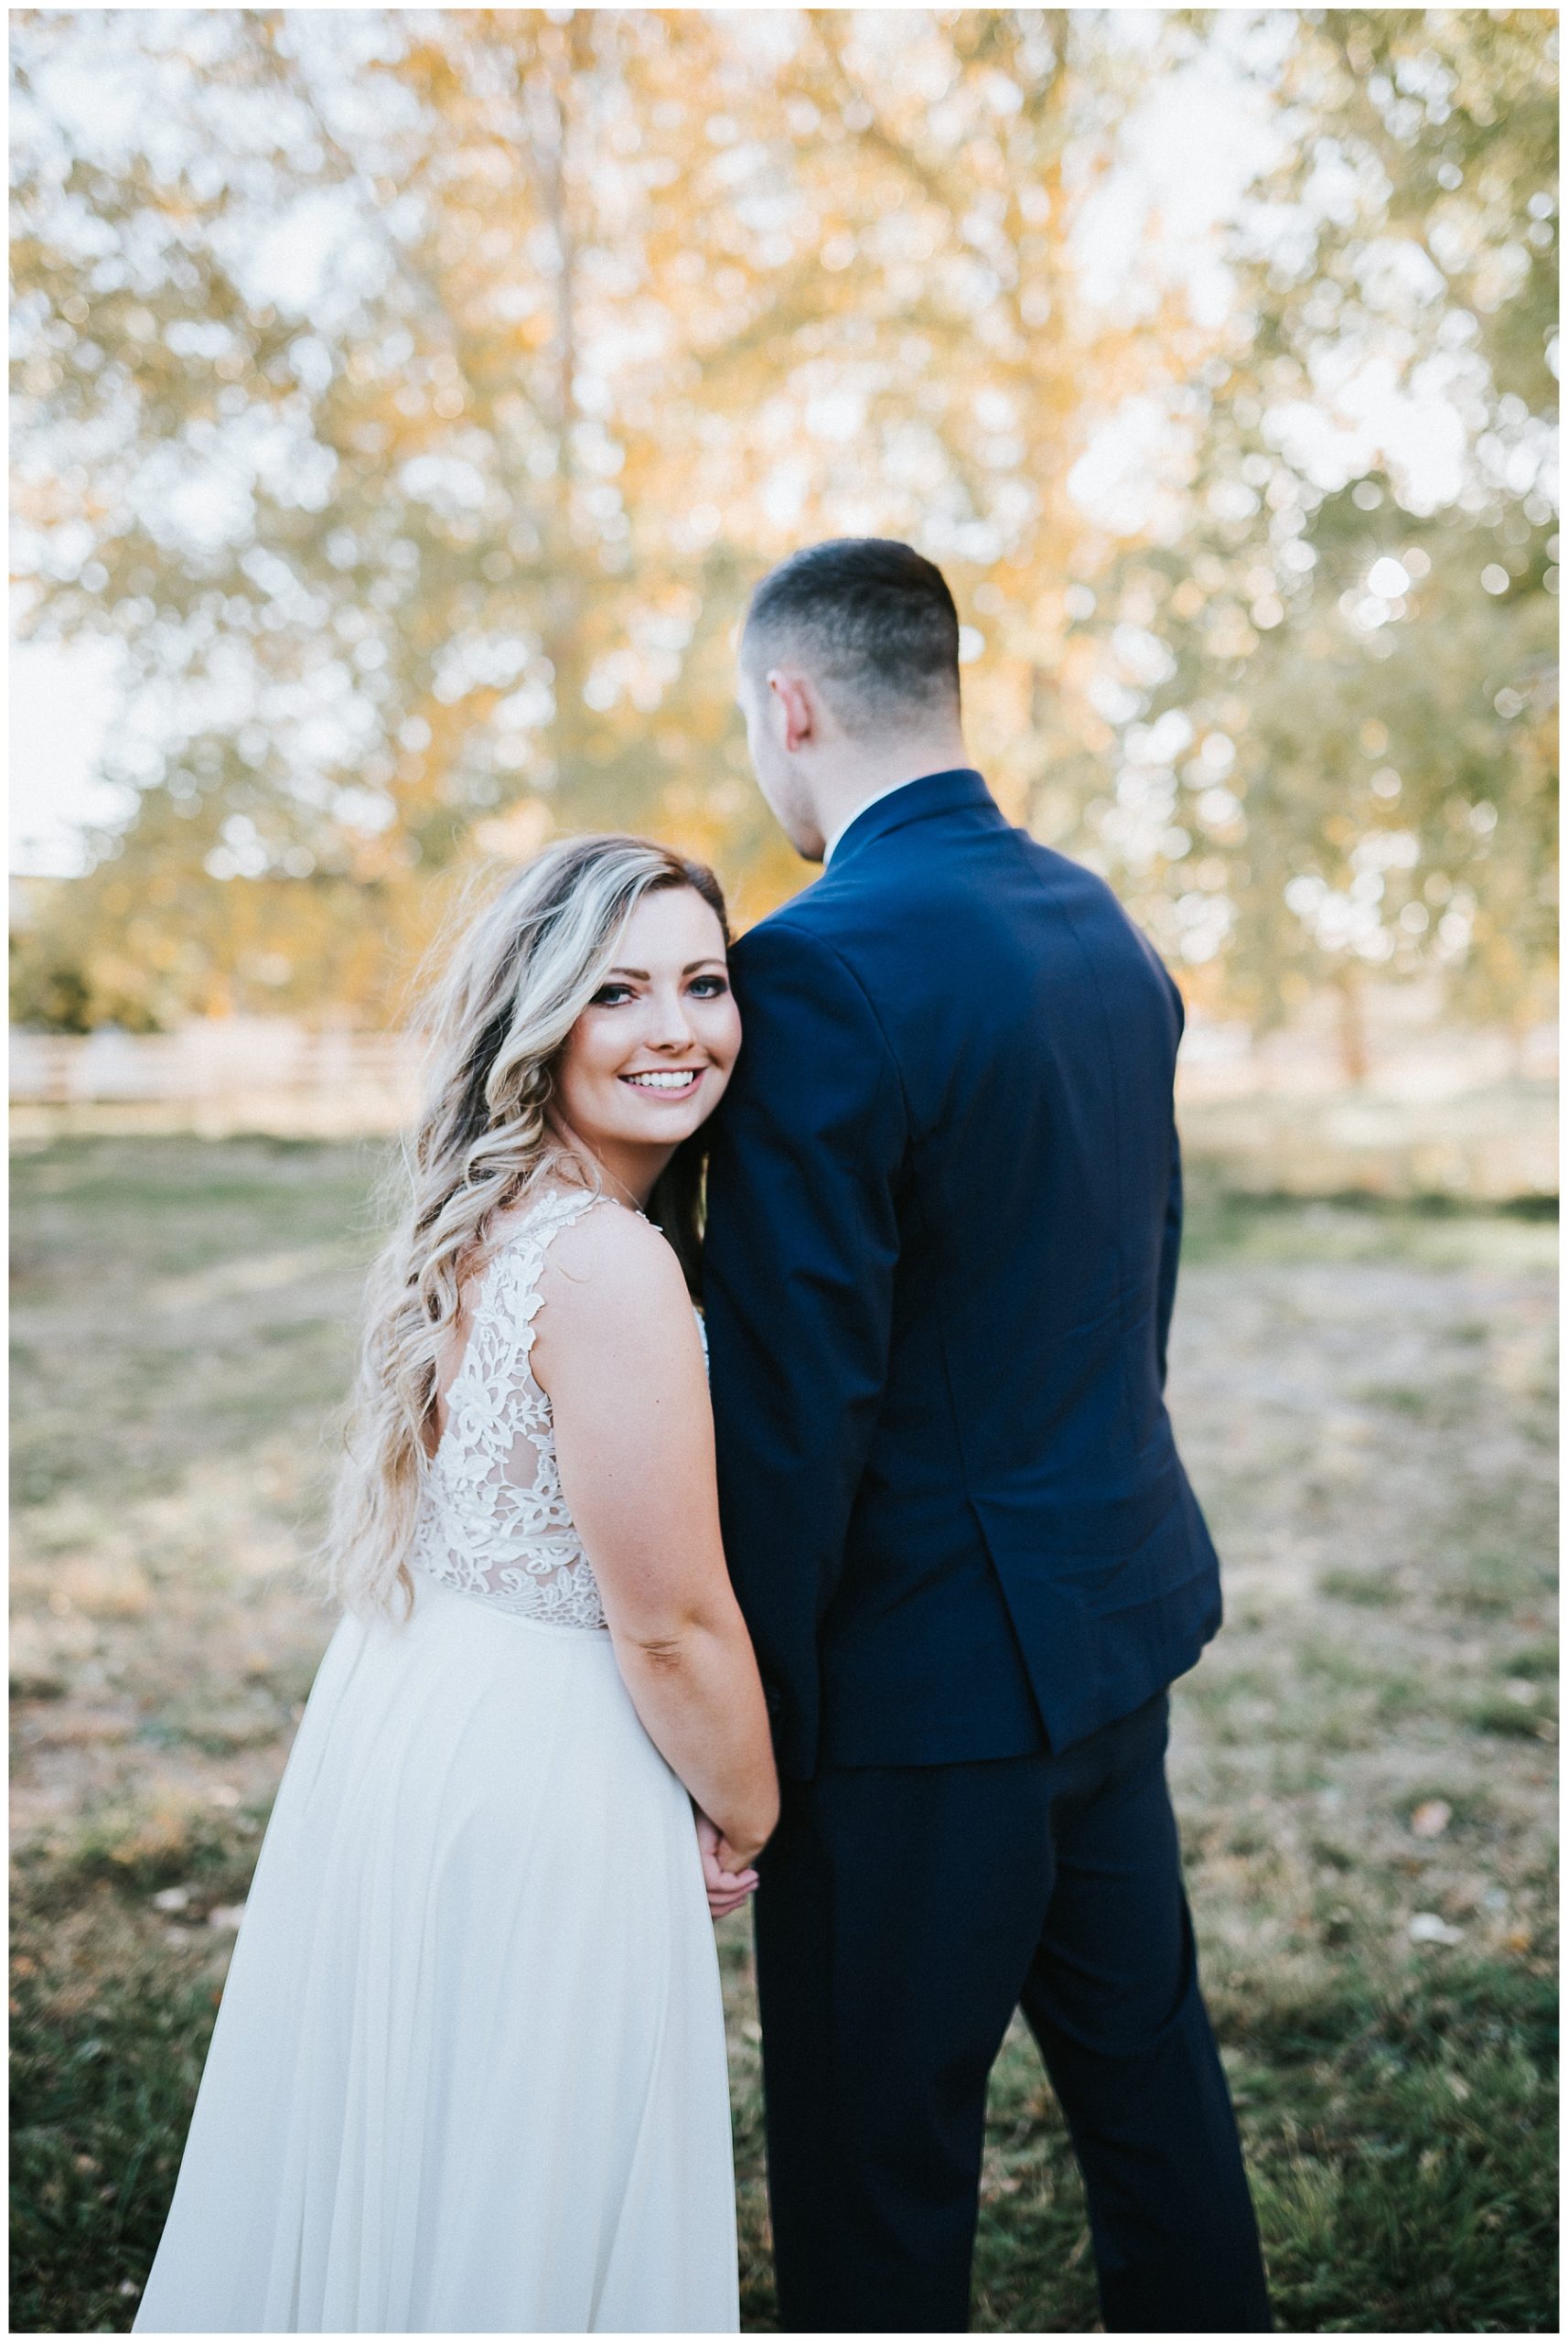 boho-bride-and-groom-long-wedding-dress-with-train-bride-and-groom-flowy-wedding-dress-fall-wedding-twin-falls-idaho-wedding-photographer-wedding-in-apple-orchard-finch-film-and-photo